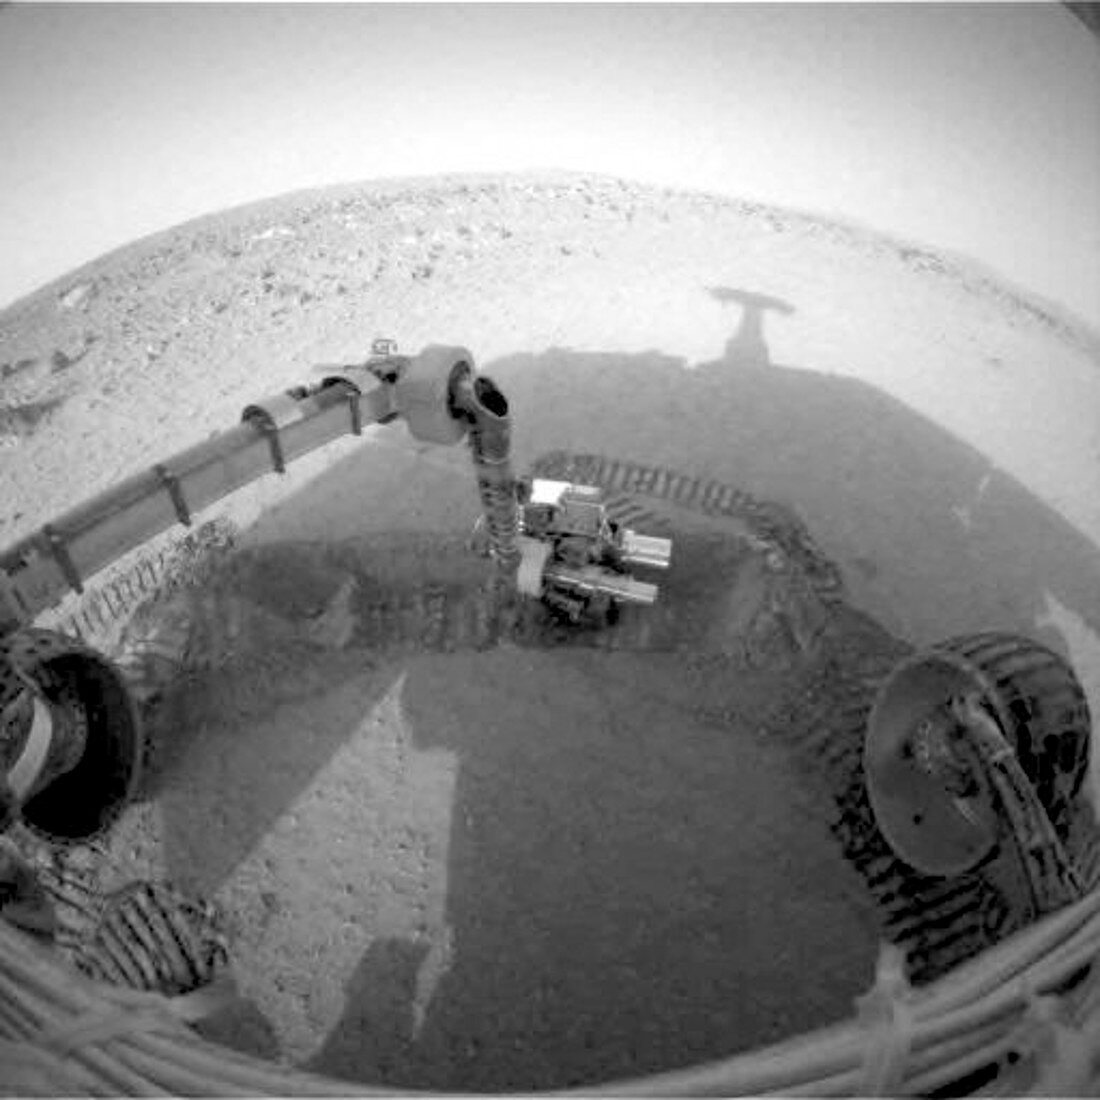 Trench dug by Spirit on Mars